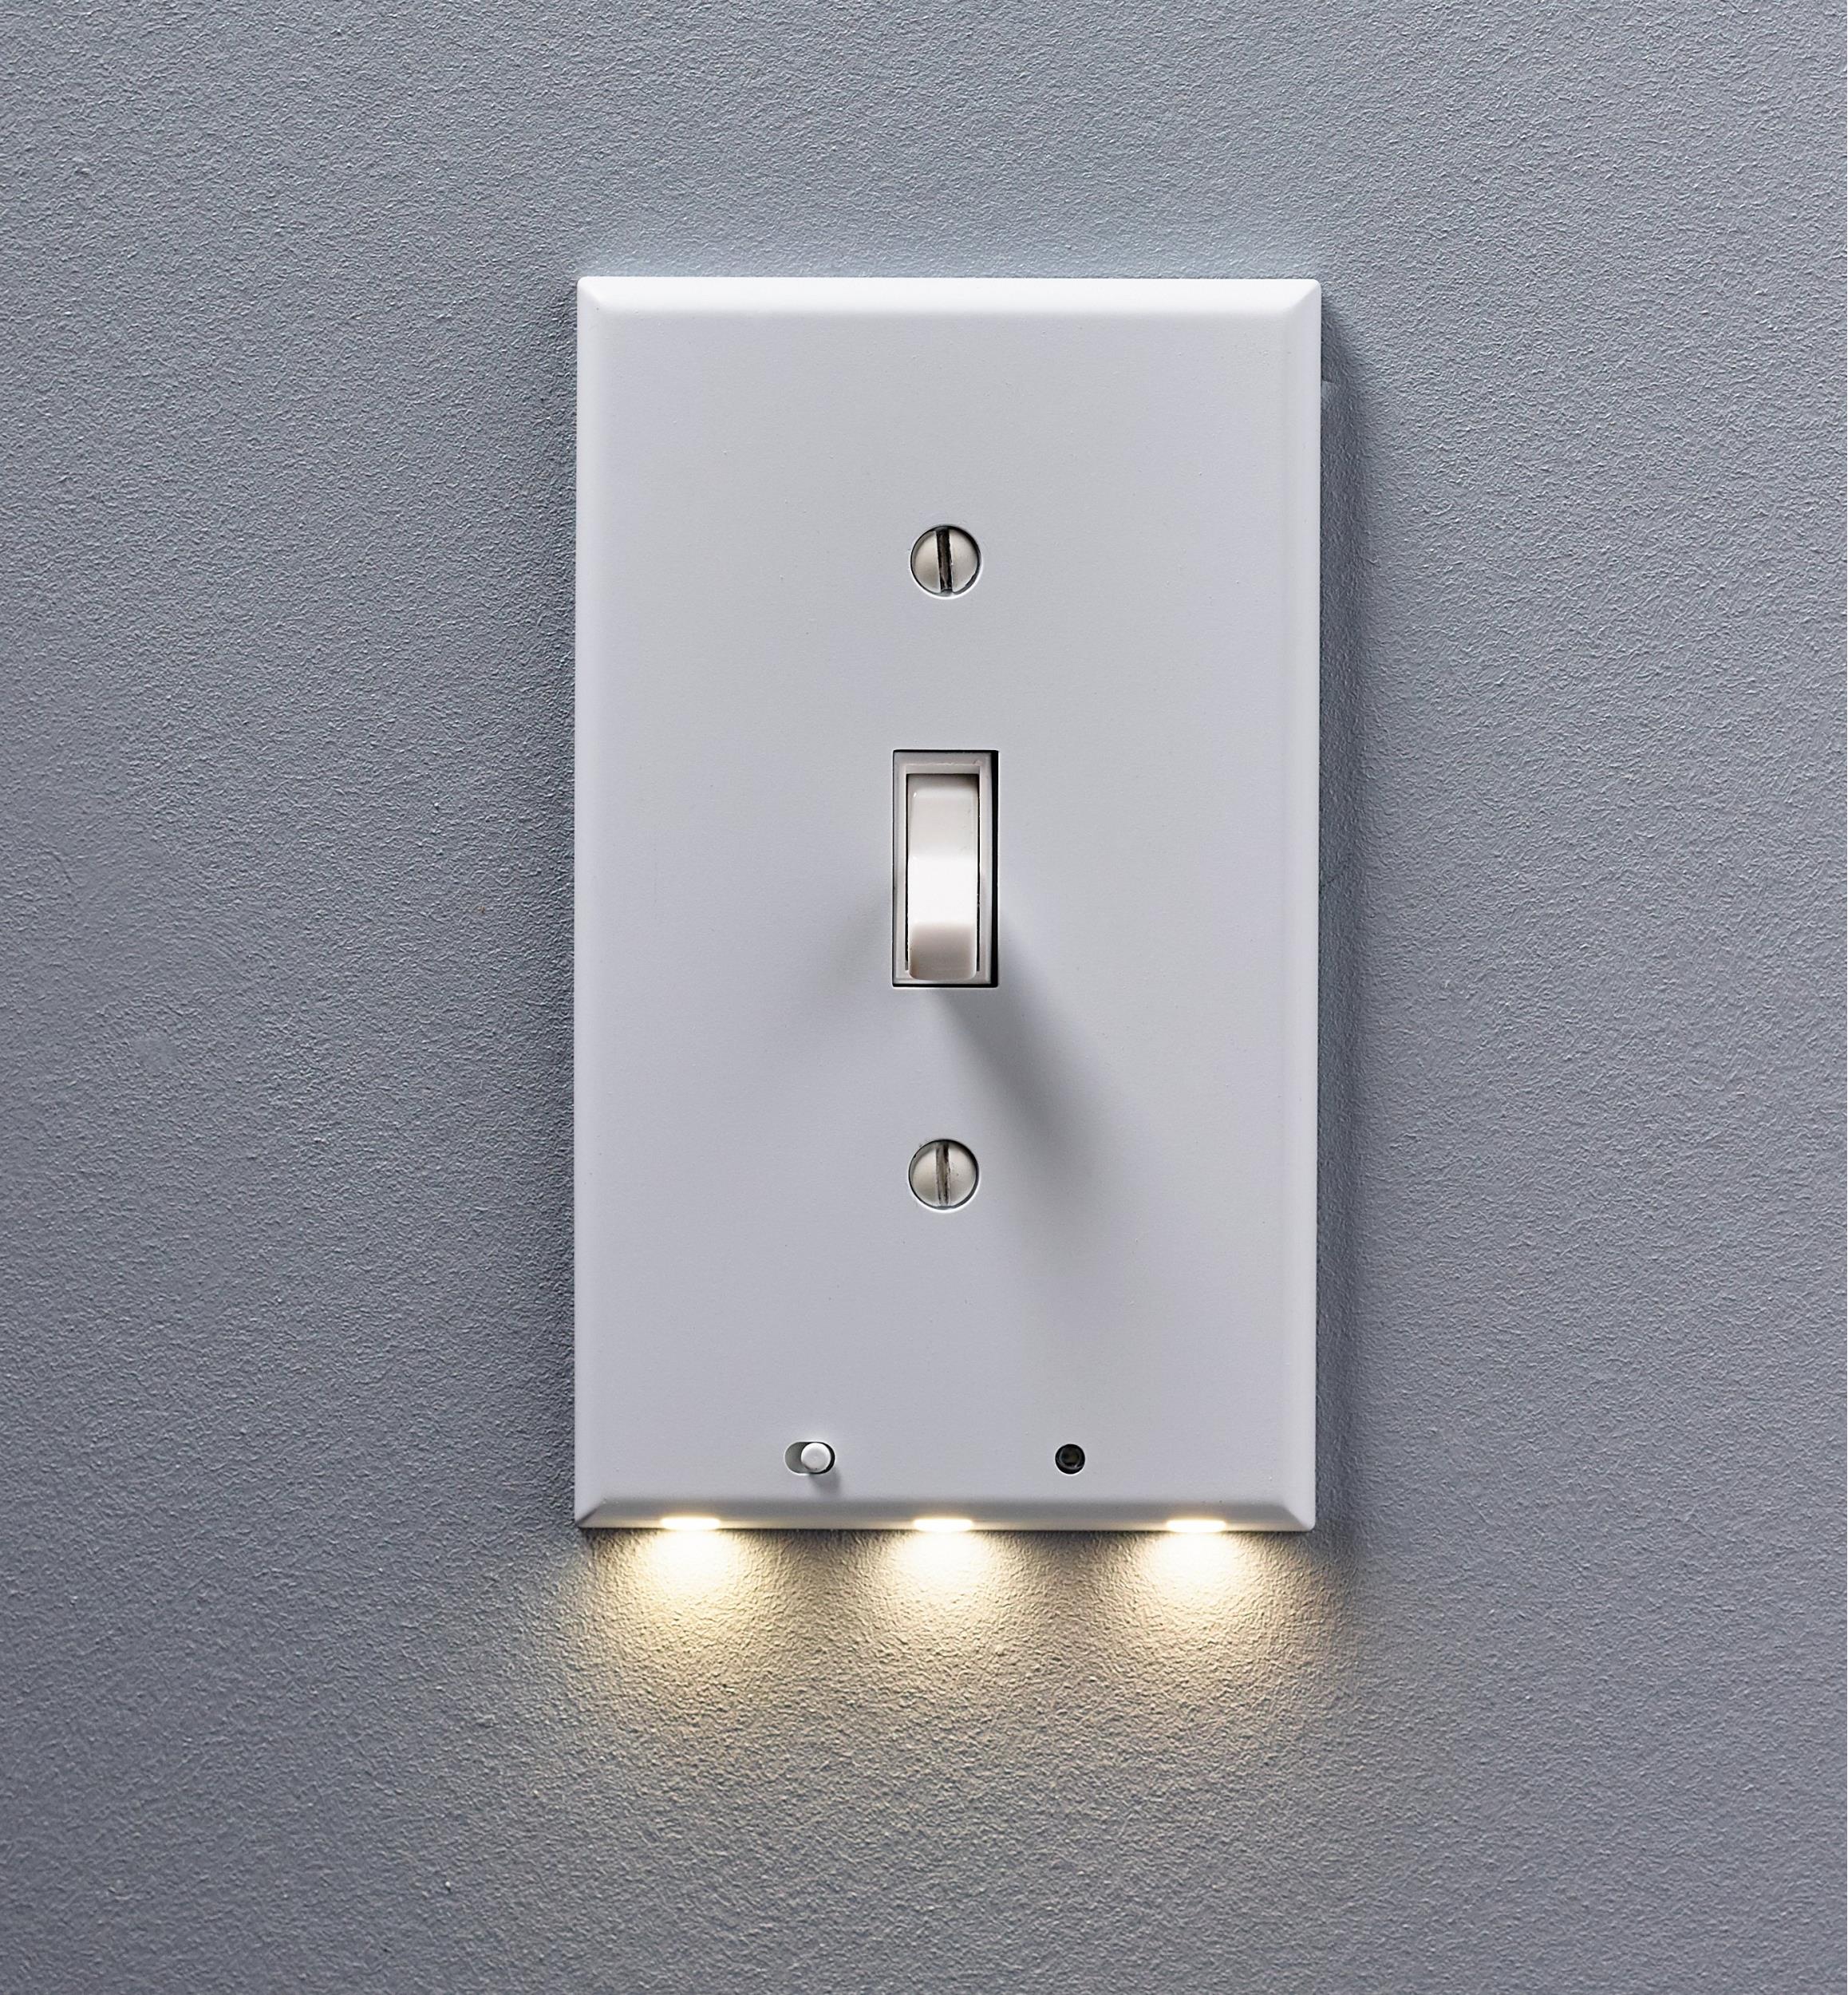 99W0274 - LED Toggle Switch Cover Plate.